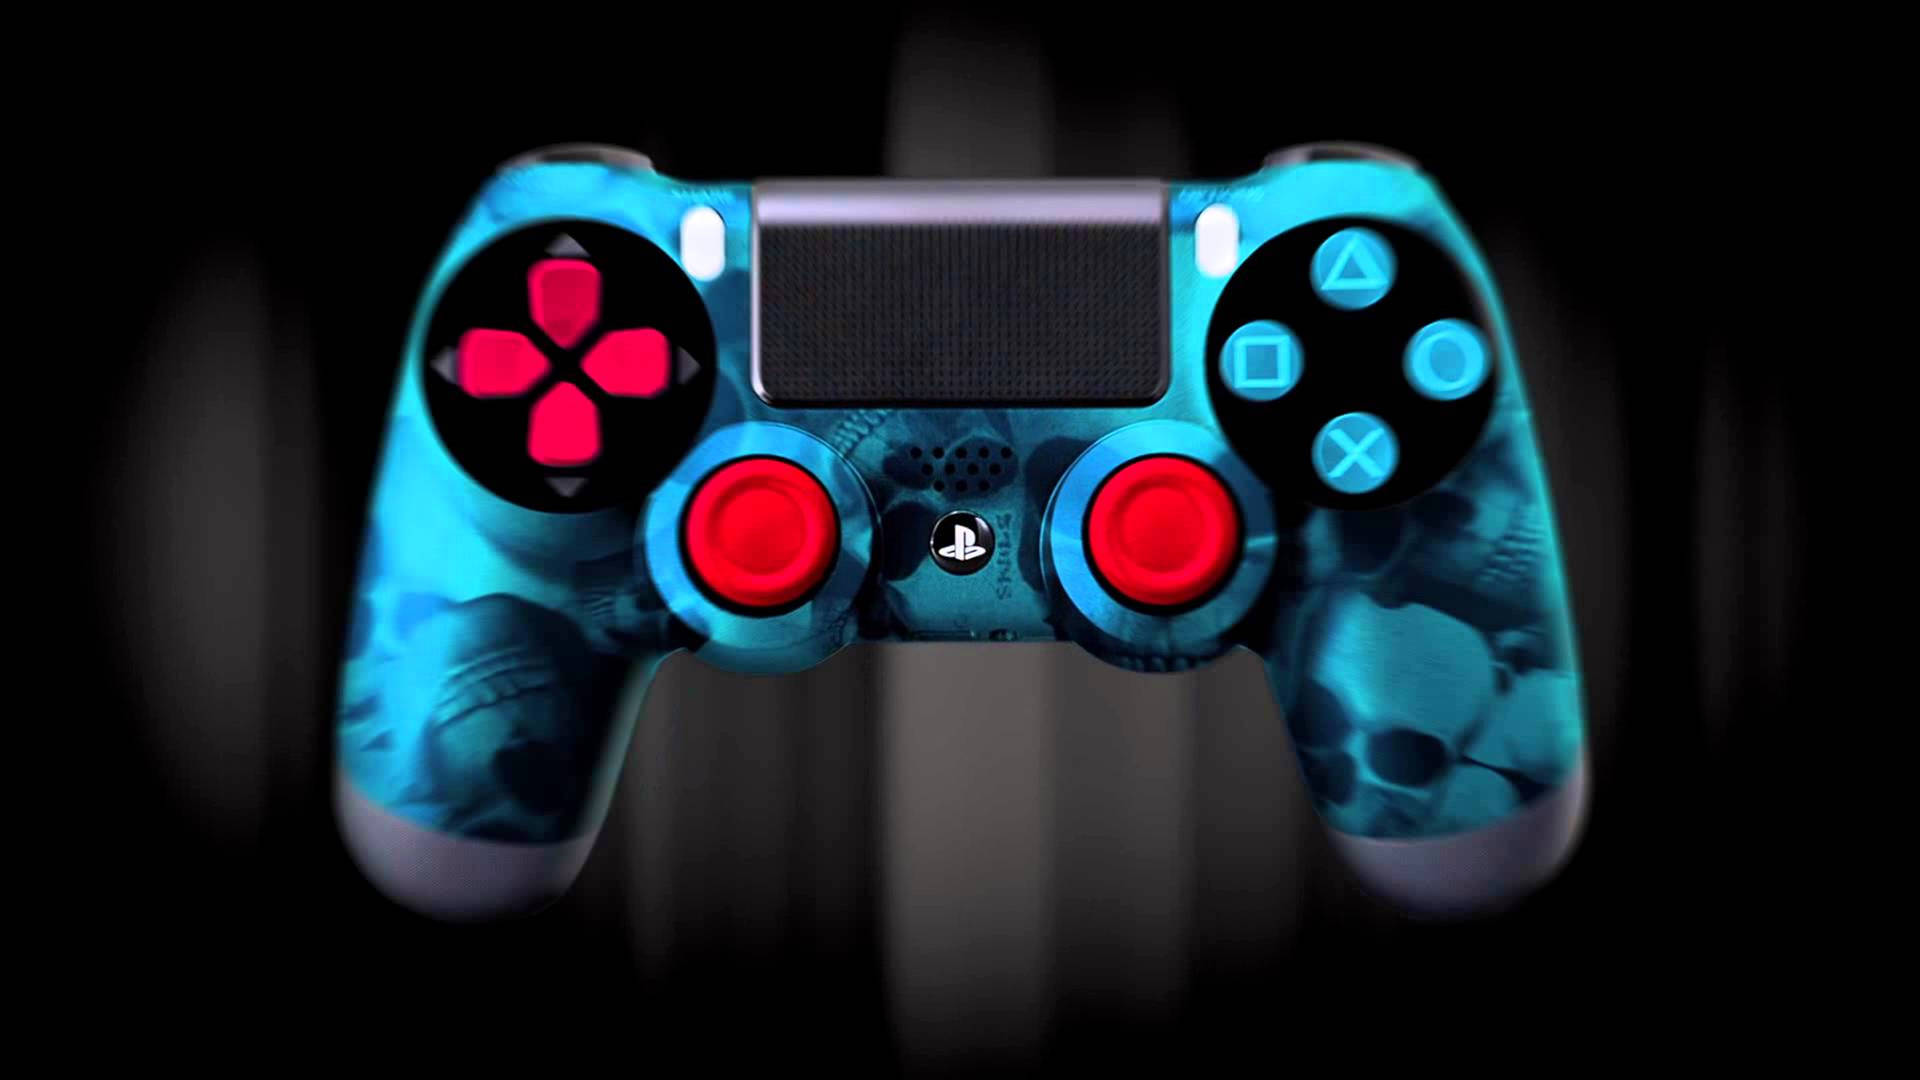 4k Ps4 With Neon Skull Decal Background